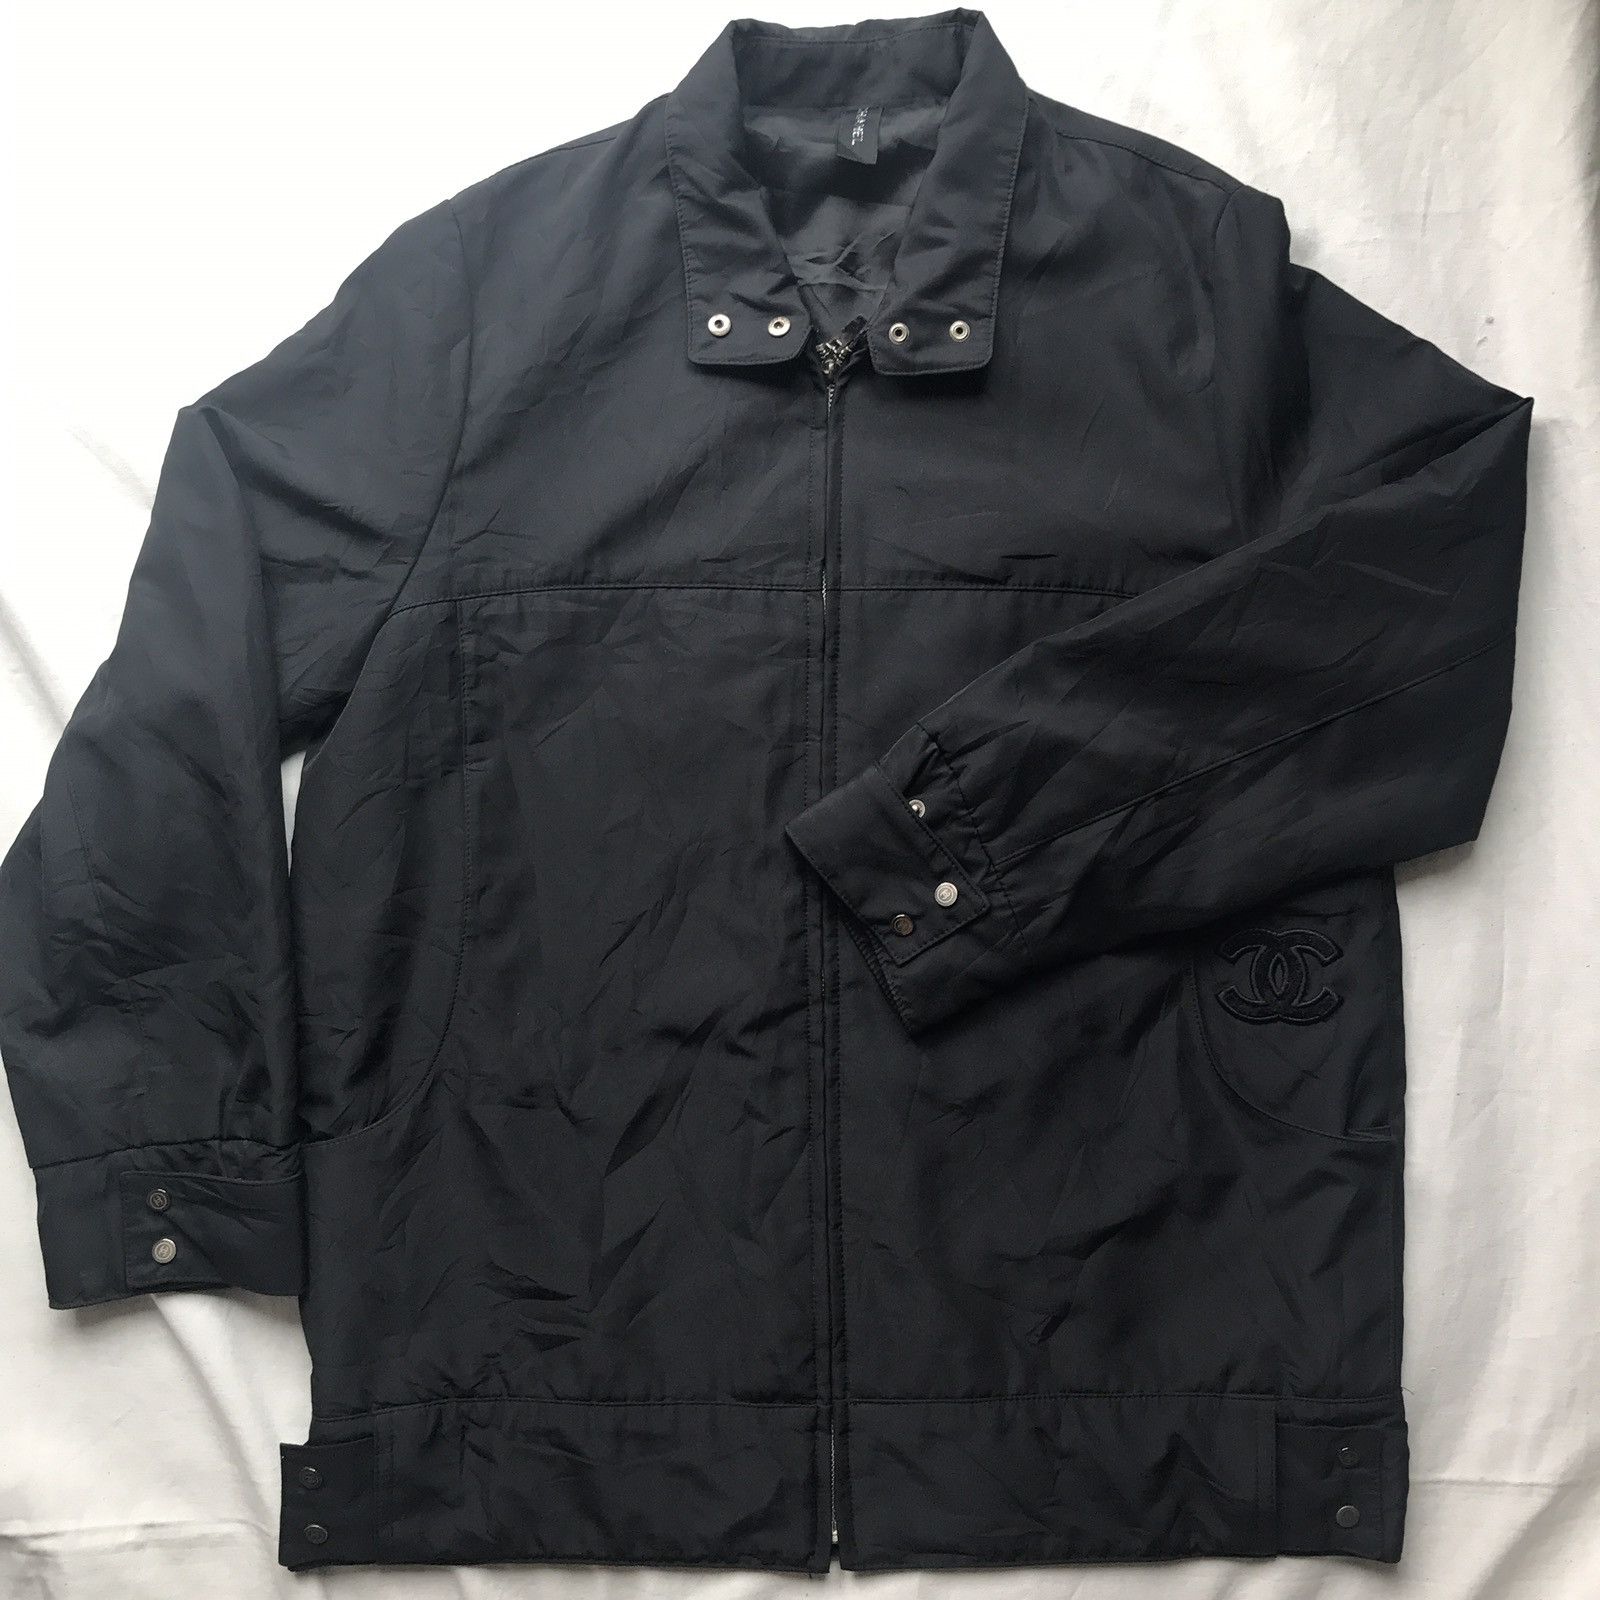 Chanel Chanel Bomber | Grailed